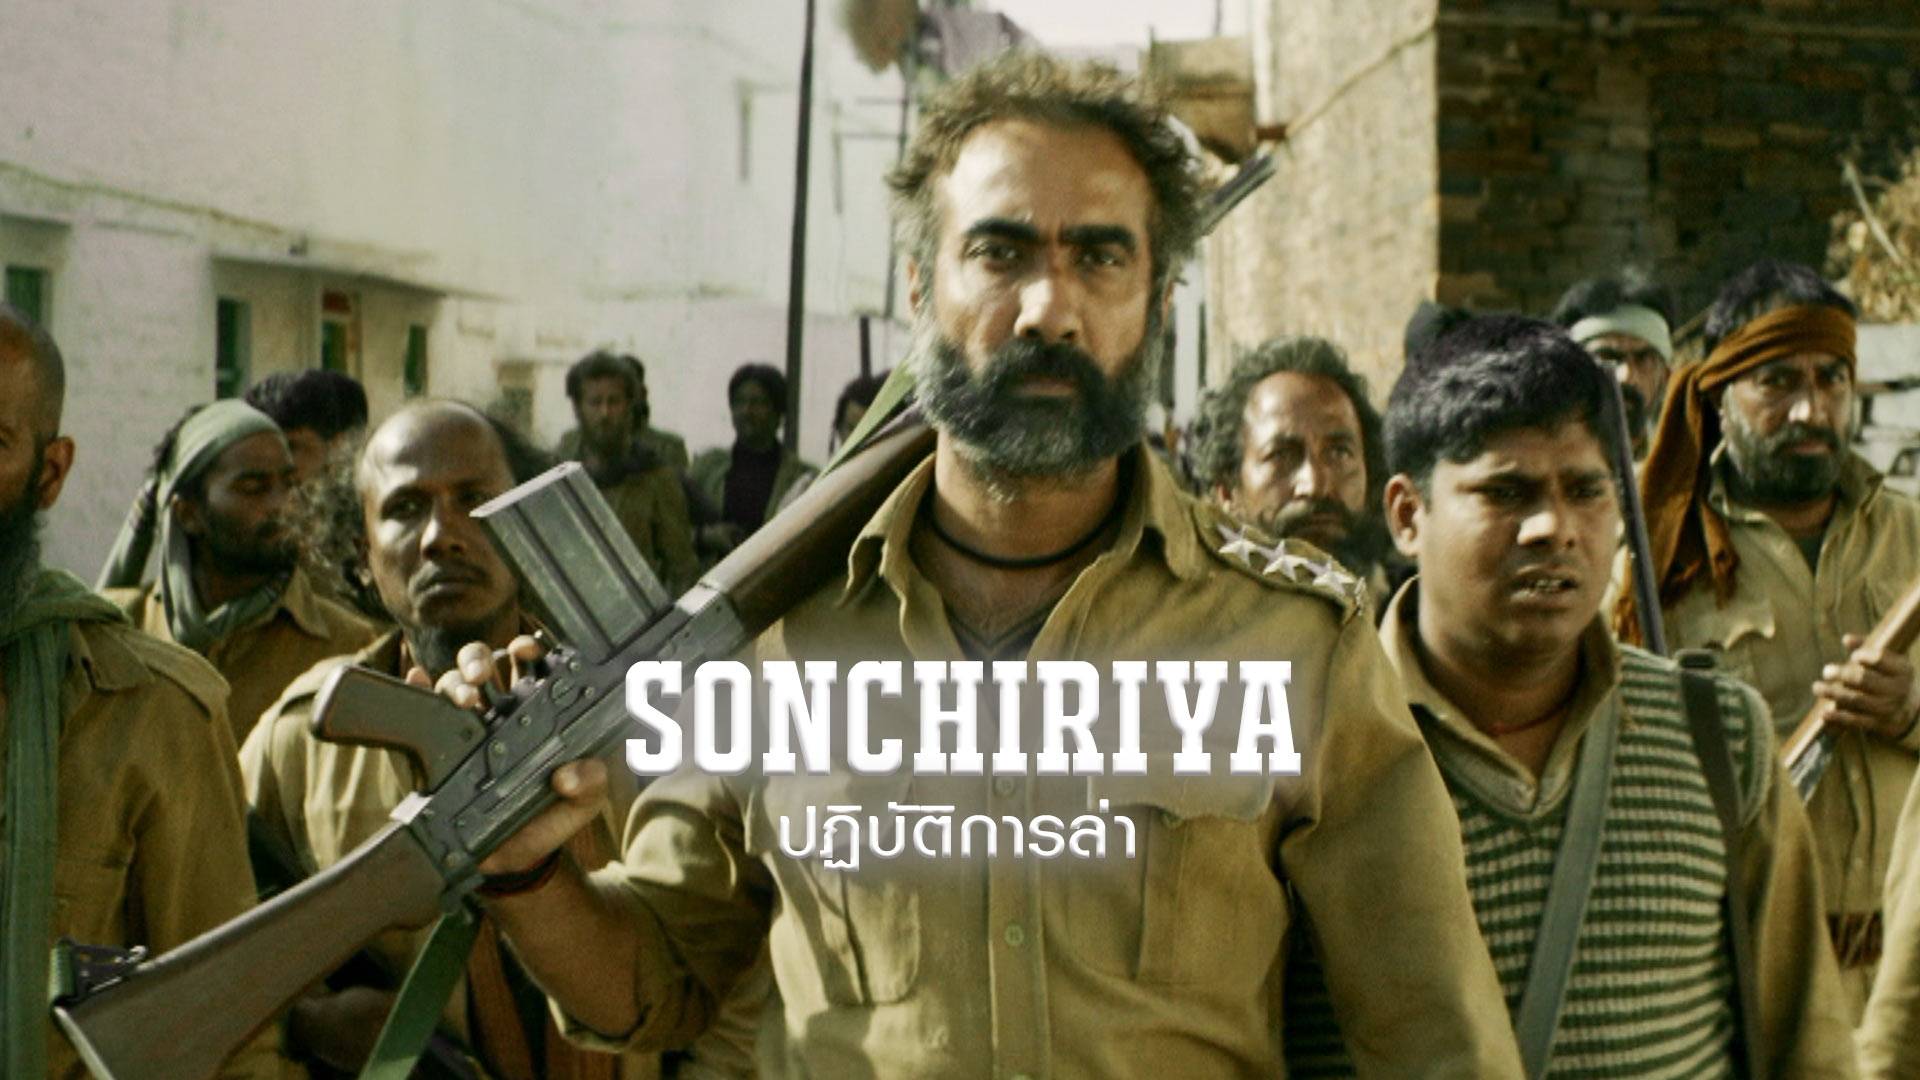 Sonchiriya' Review: A tale of dacoits set on the elusive path of redemption  for their soul - Entertainment